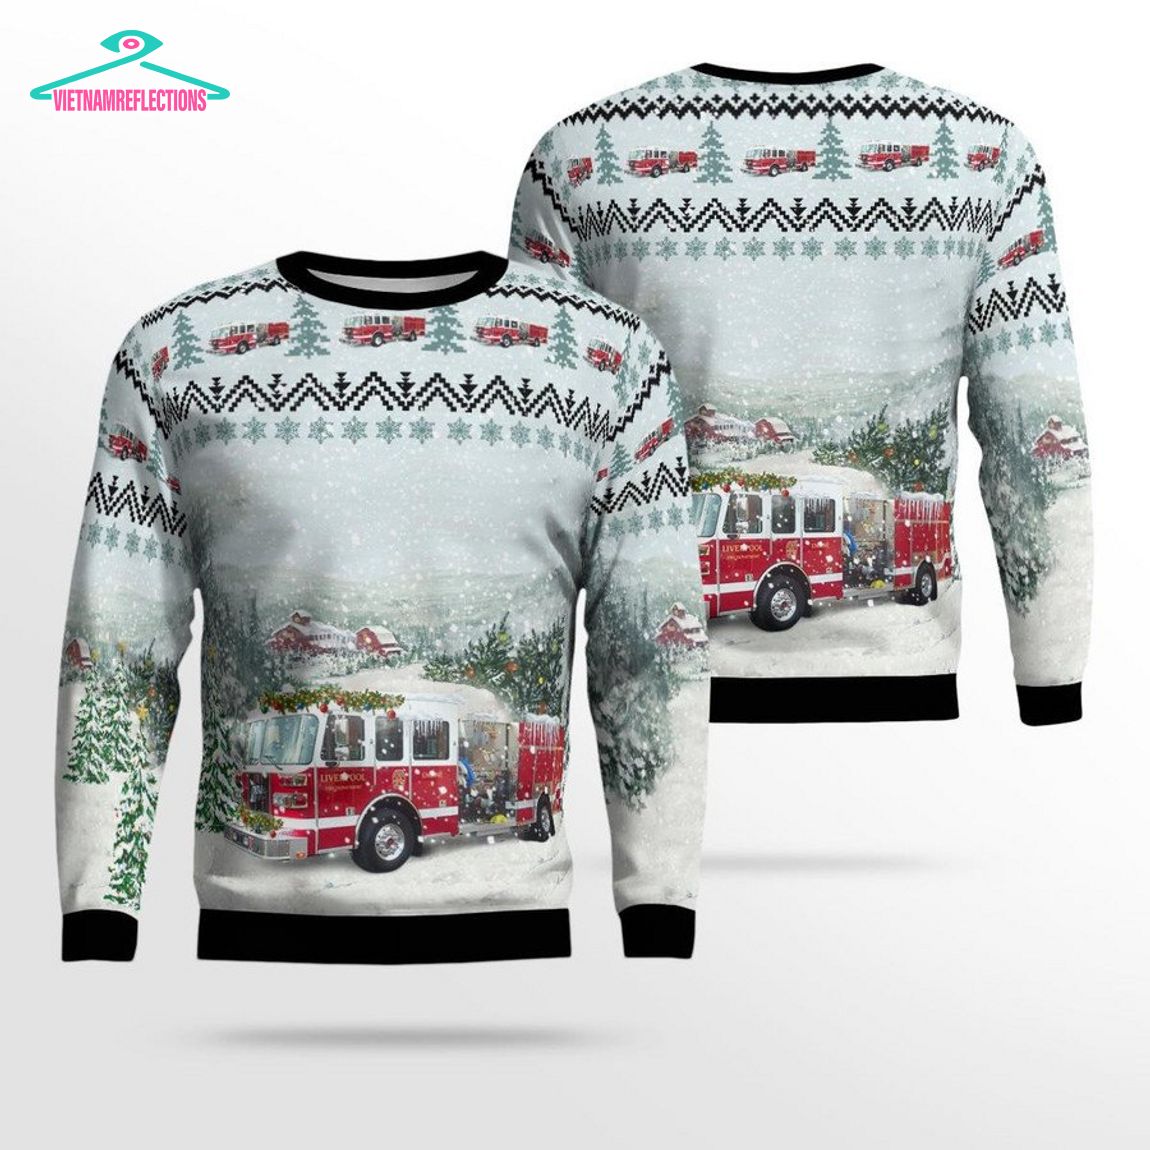 New York Liverpool Fire Department 3D Christmas Sweater - Awesome Pic guys